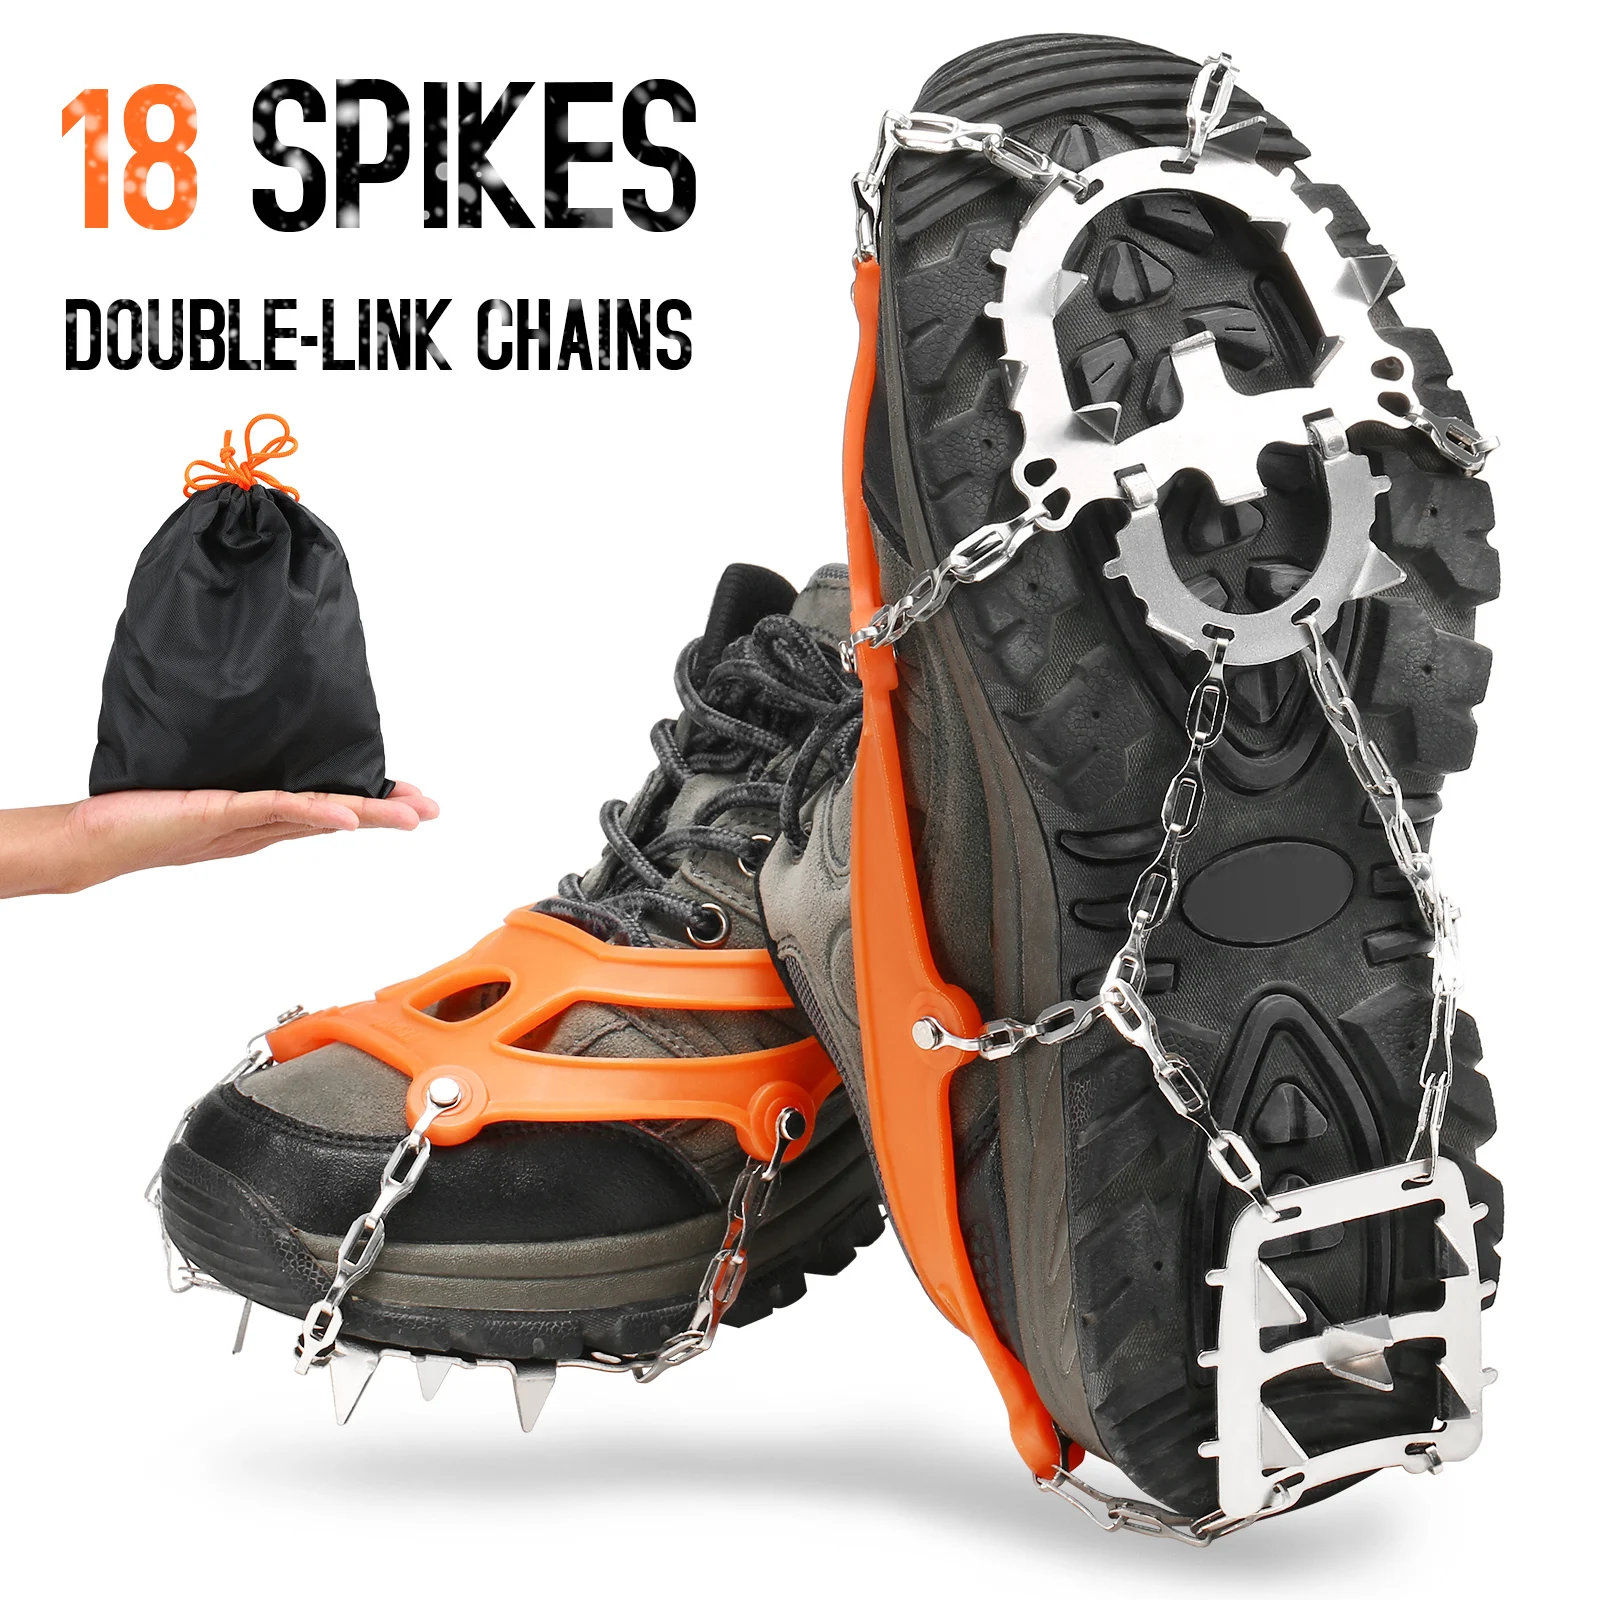 

Crampon 18/10 Teenth Spikes Traction Cleats Anti-slip Ice Snow Grips with Storage Pouch Crampon Anti-slip Ice Snow Grips